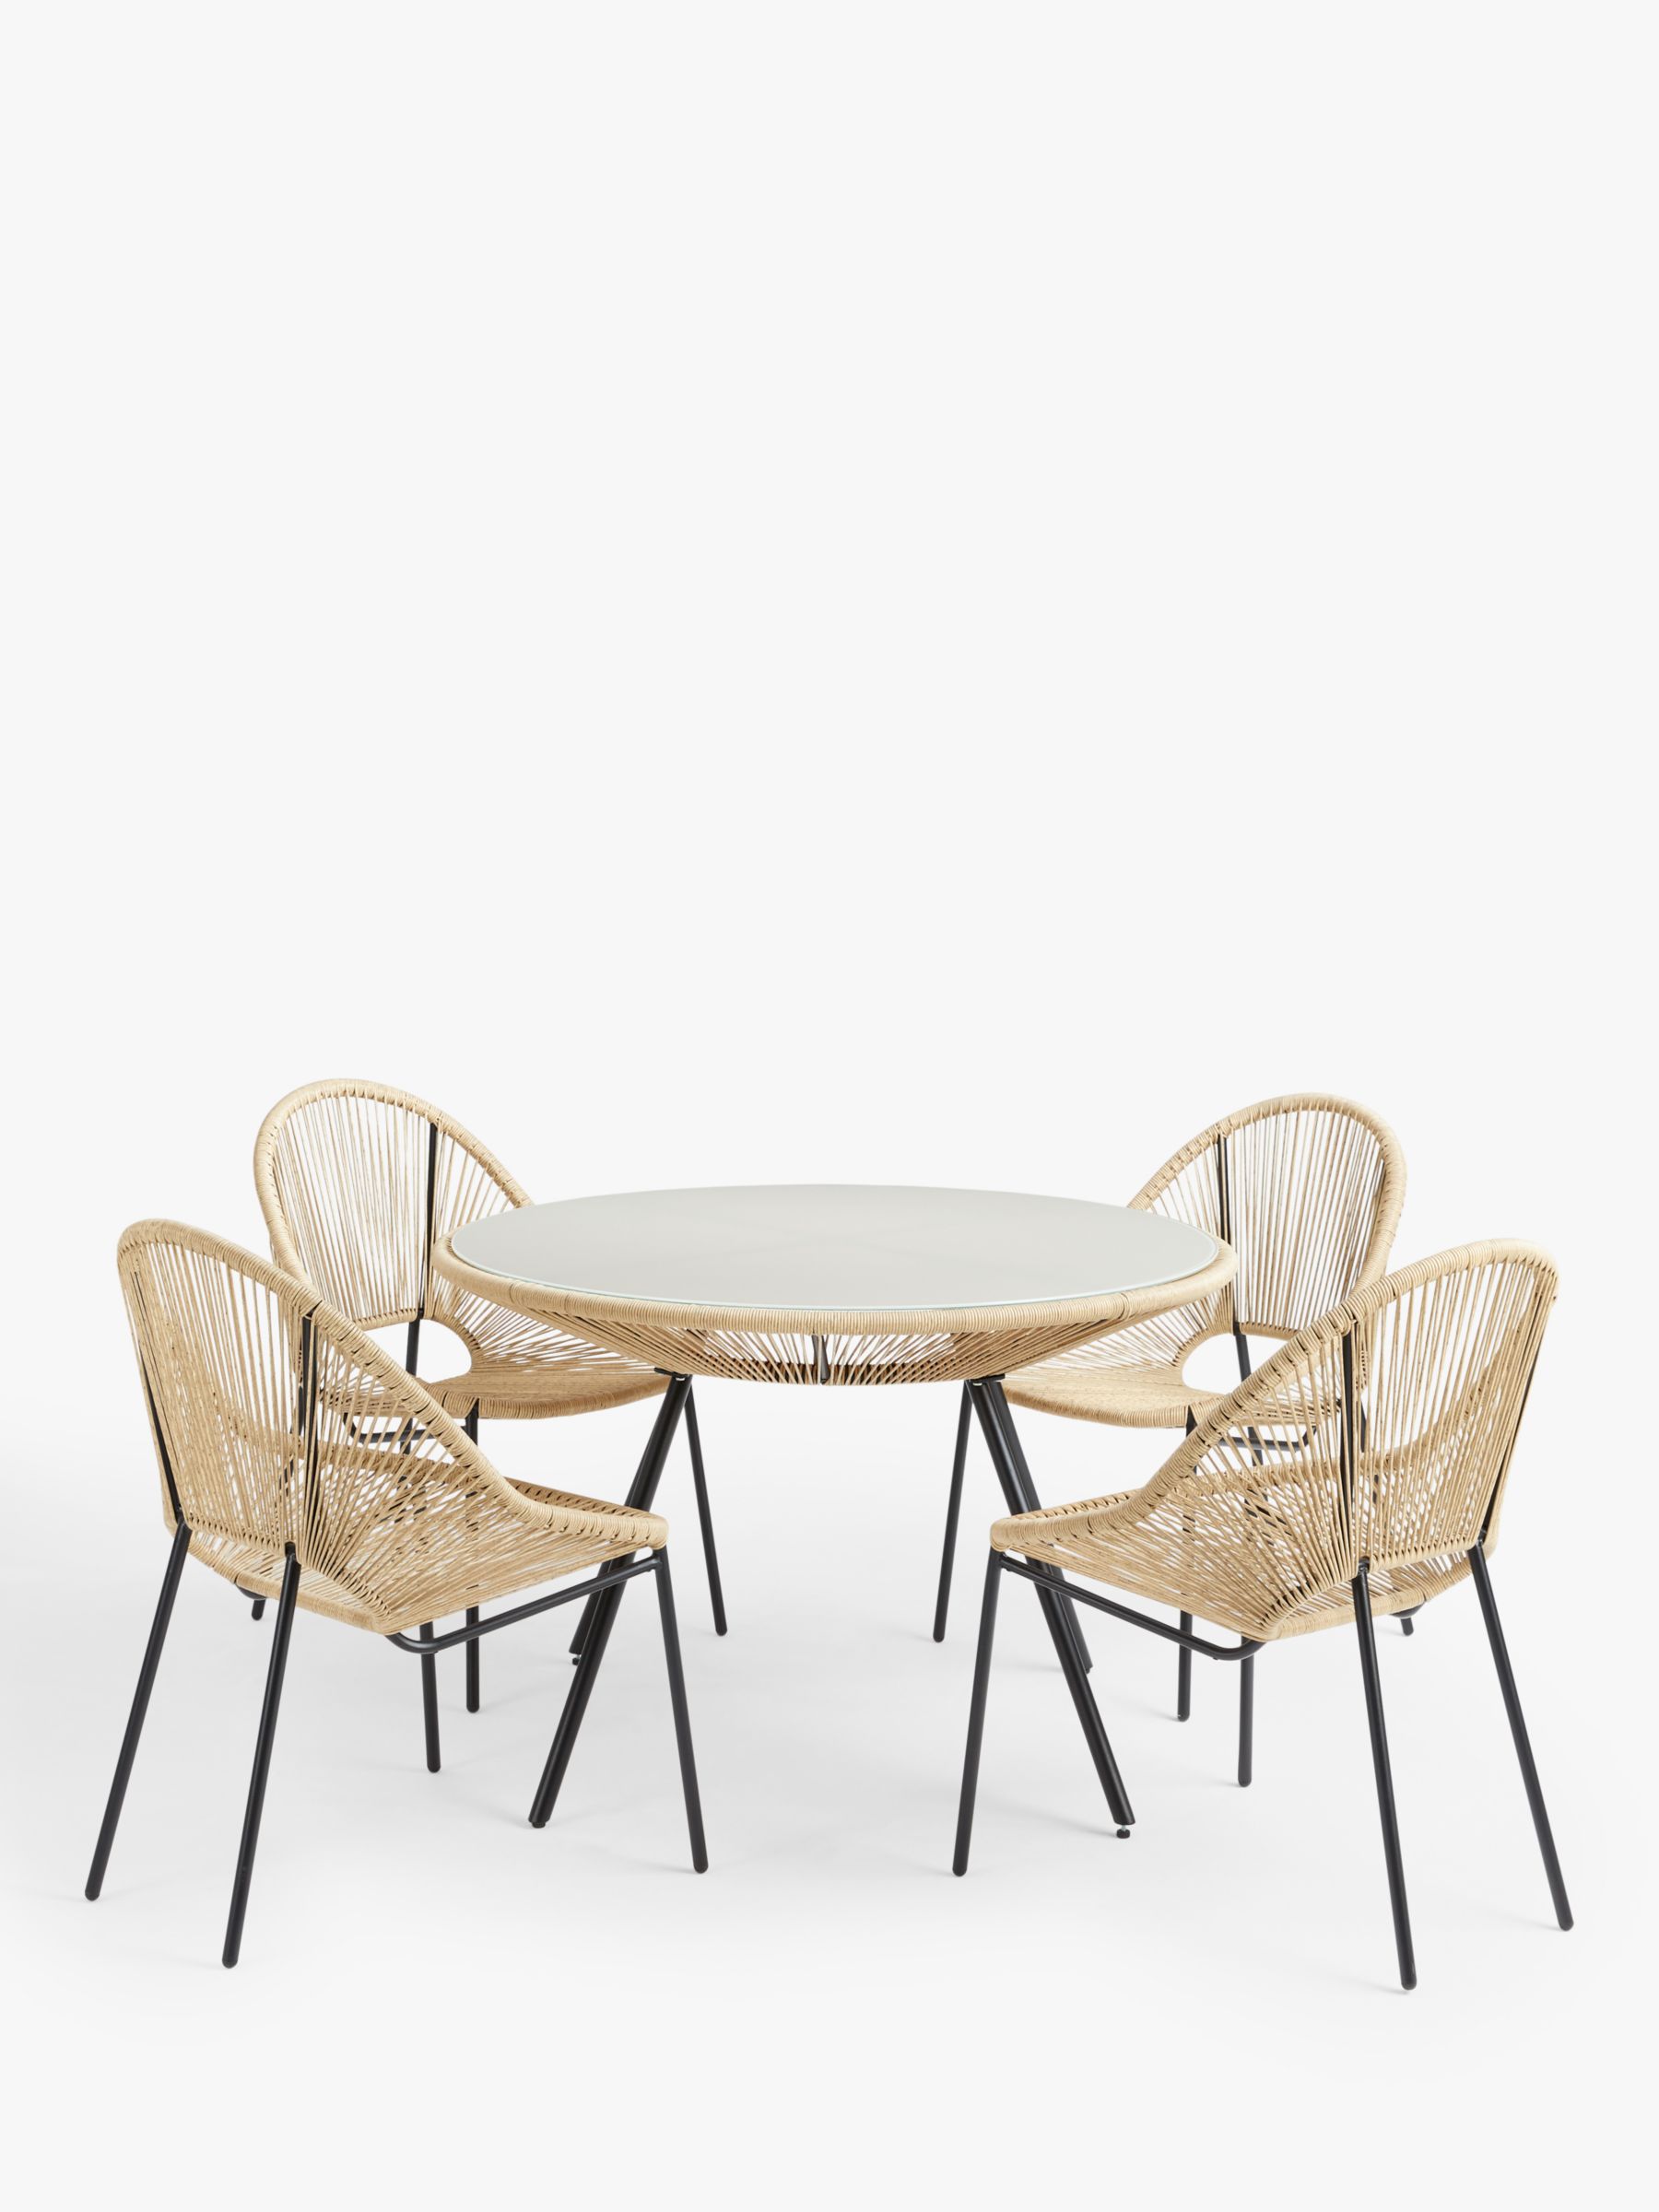 Photo of John lewis salsa 4-seater round garden dining table & chairs set